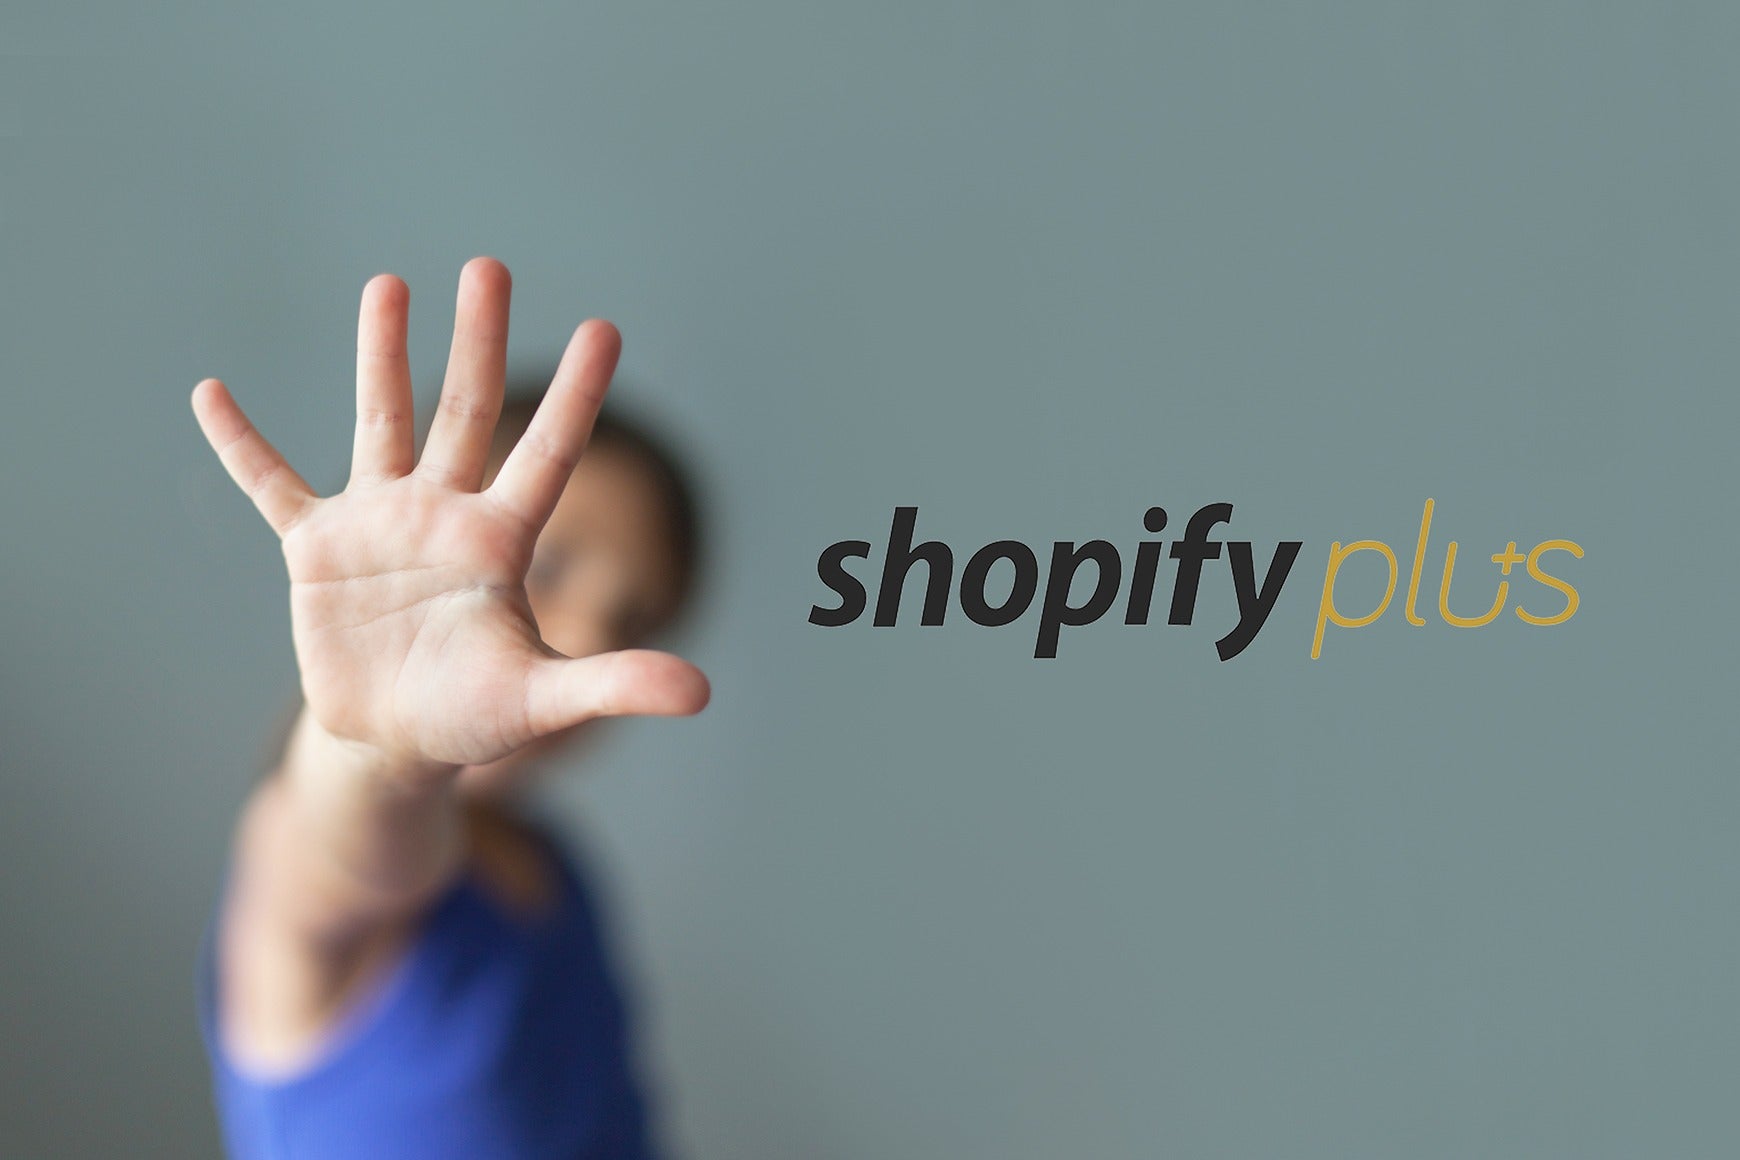 5 great reasons to move from Magento to Shopify Plus